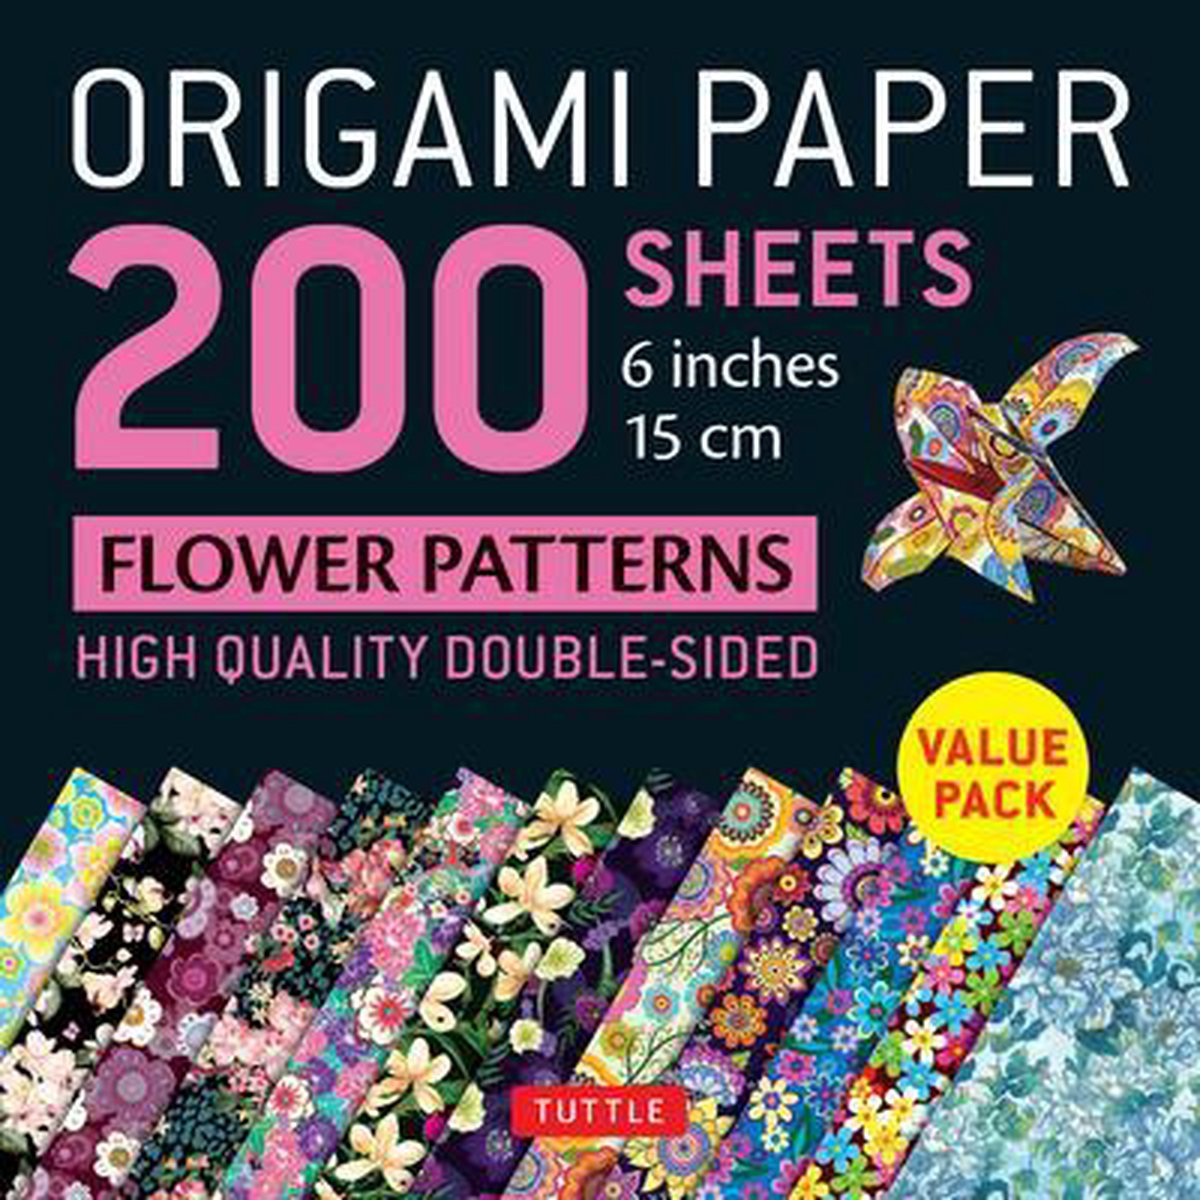 Origami Paper 200 sheets Flower Patterns 6 (15 cm)